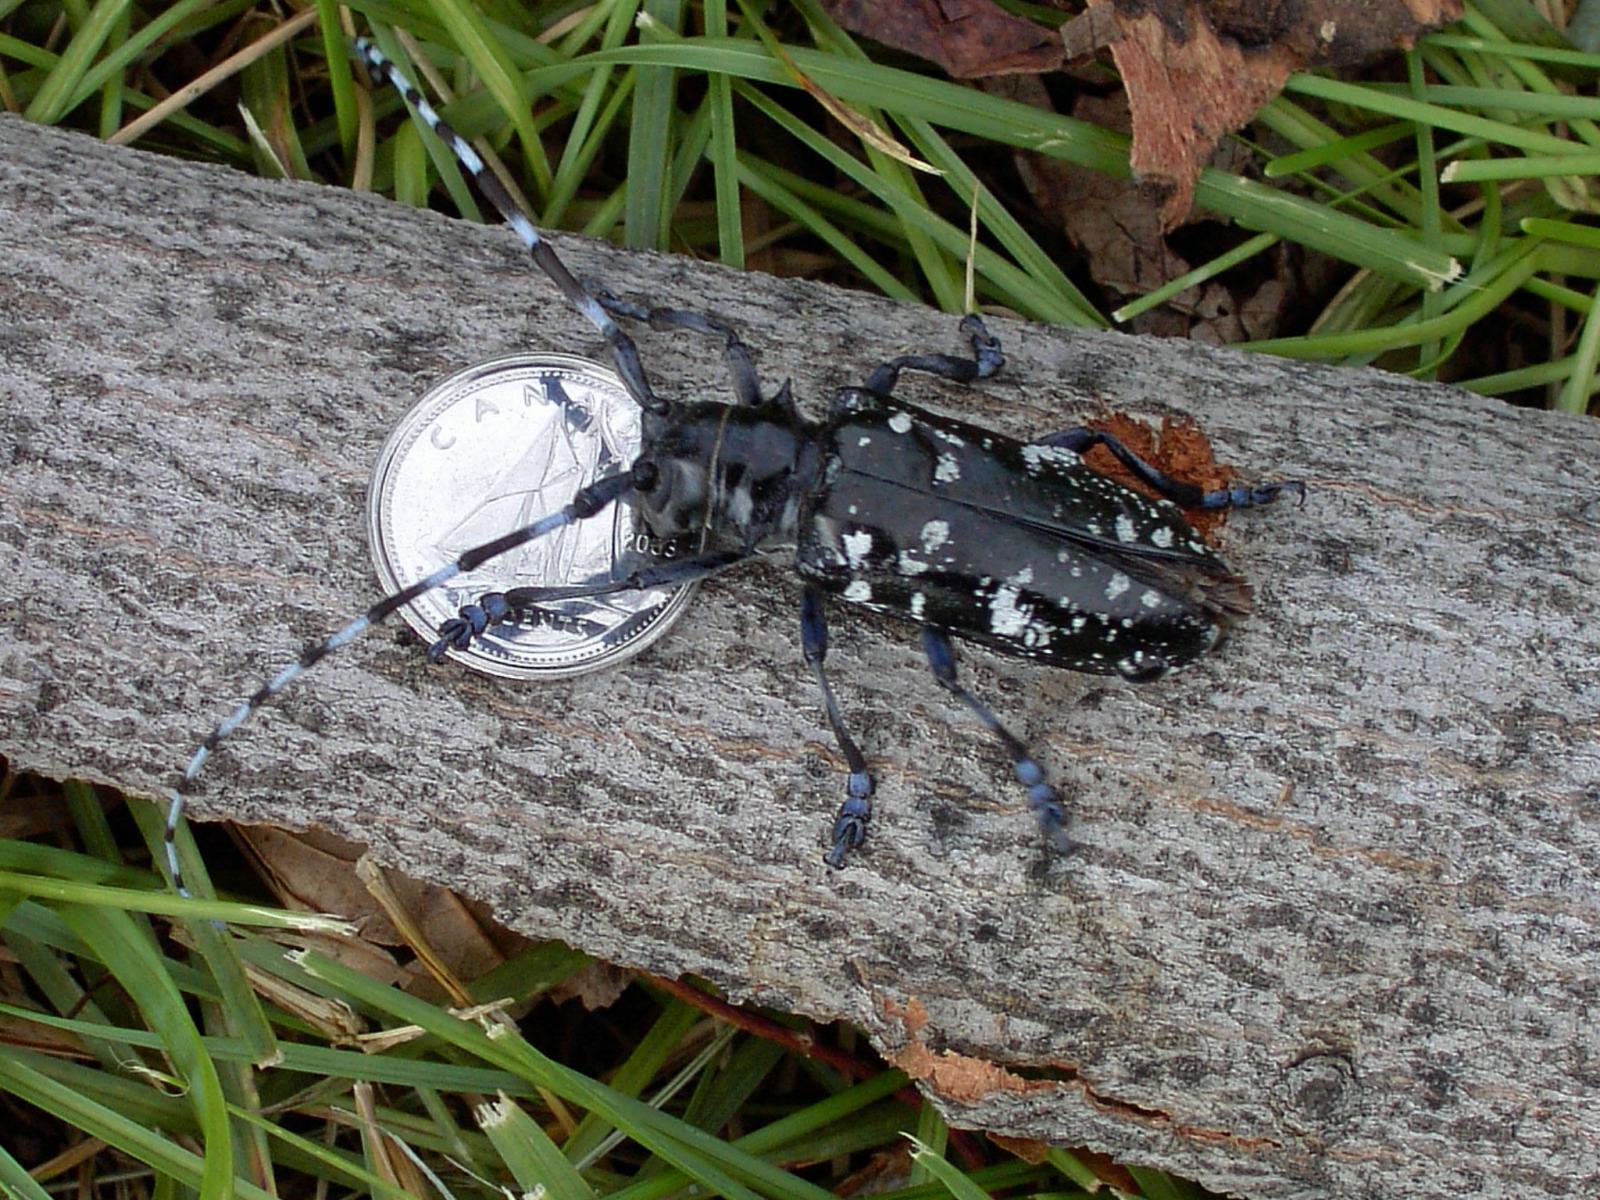 Asian long-horned beetle found in Mississauga